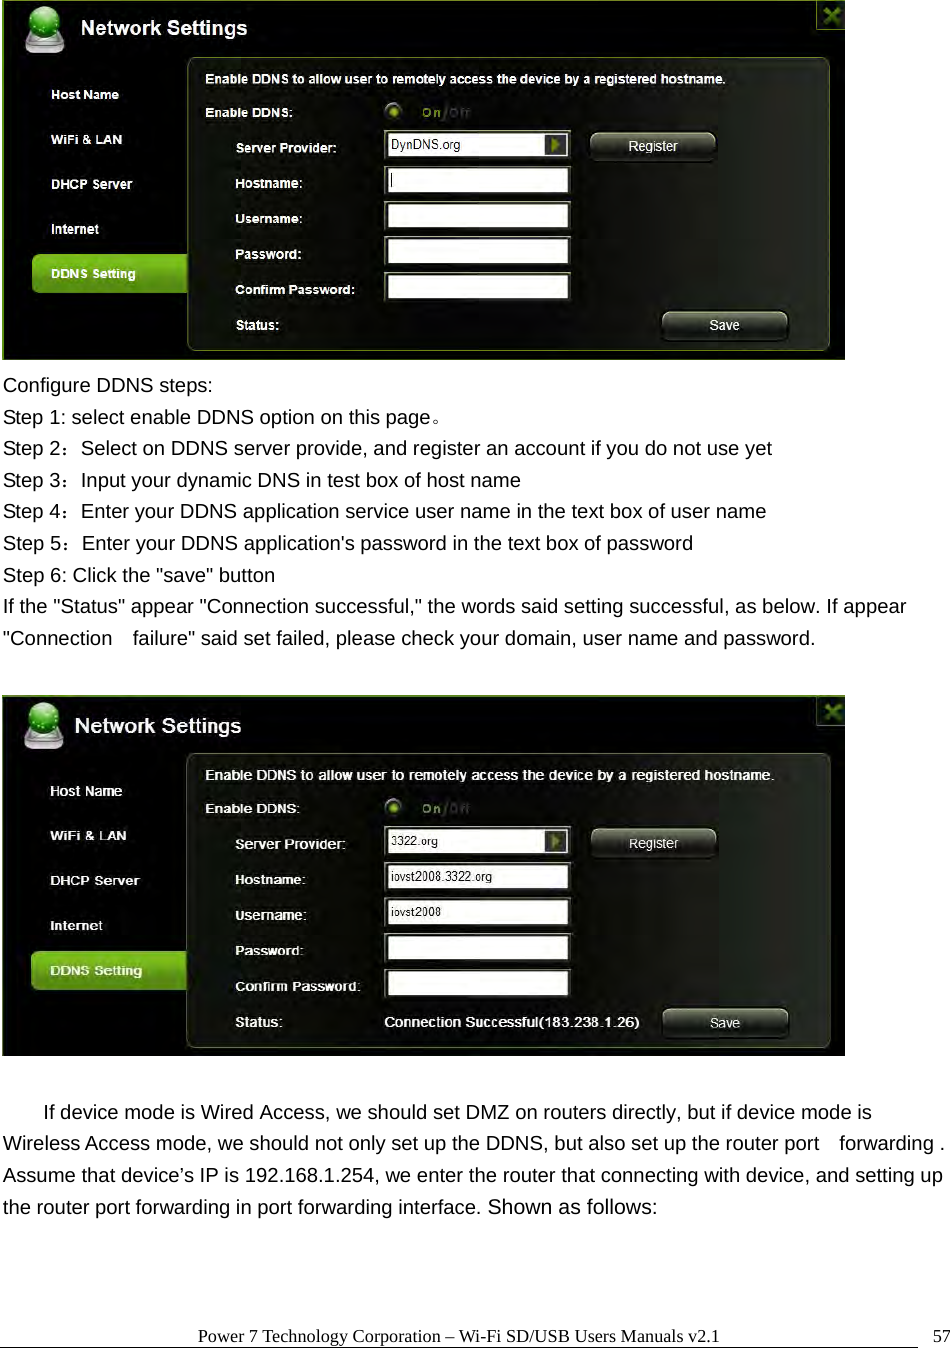 Power 7 Technology Corporation – Wi-Fi SD/USB Users Manuals v2.1  57 Configure DDNS steps:   Step 1: select enable DDNS option on this page。 Step 2：Select on DDNS server provide, and register an account if you do not use yet Step 3：Input your dynamic DNS in test box of host name Step 4：Enter your DDNS application service user name in the text box of user name Step 5：Enter your DDNS application&apos;s password in the text box of password Step 6: Click the &quot;save&quot; button If the &quot;Status&quot; appear &quot;Connection successful,&quot; the words said setting successful, as below. If appear &quot;Connection    failure&quot; said set failed, please check your domain, user name and password.    If device mode is Wired Access, we should set DMZ on routers directly, but if device mode is   Wireless Access mode, we should not only set up the DDNS, but also set up the router port    forwarding . Assume that device’s IP is 192.168.1.254, we enter the router that connecting with device, and setting up the router port forwarding in port forwarding interface. Shown as follows:  